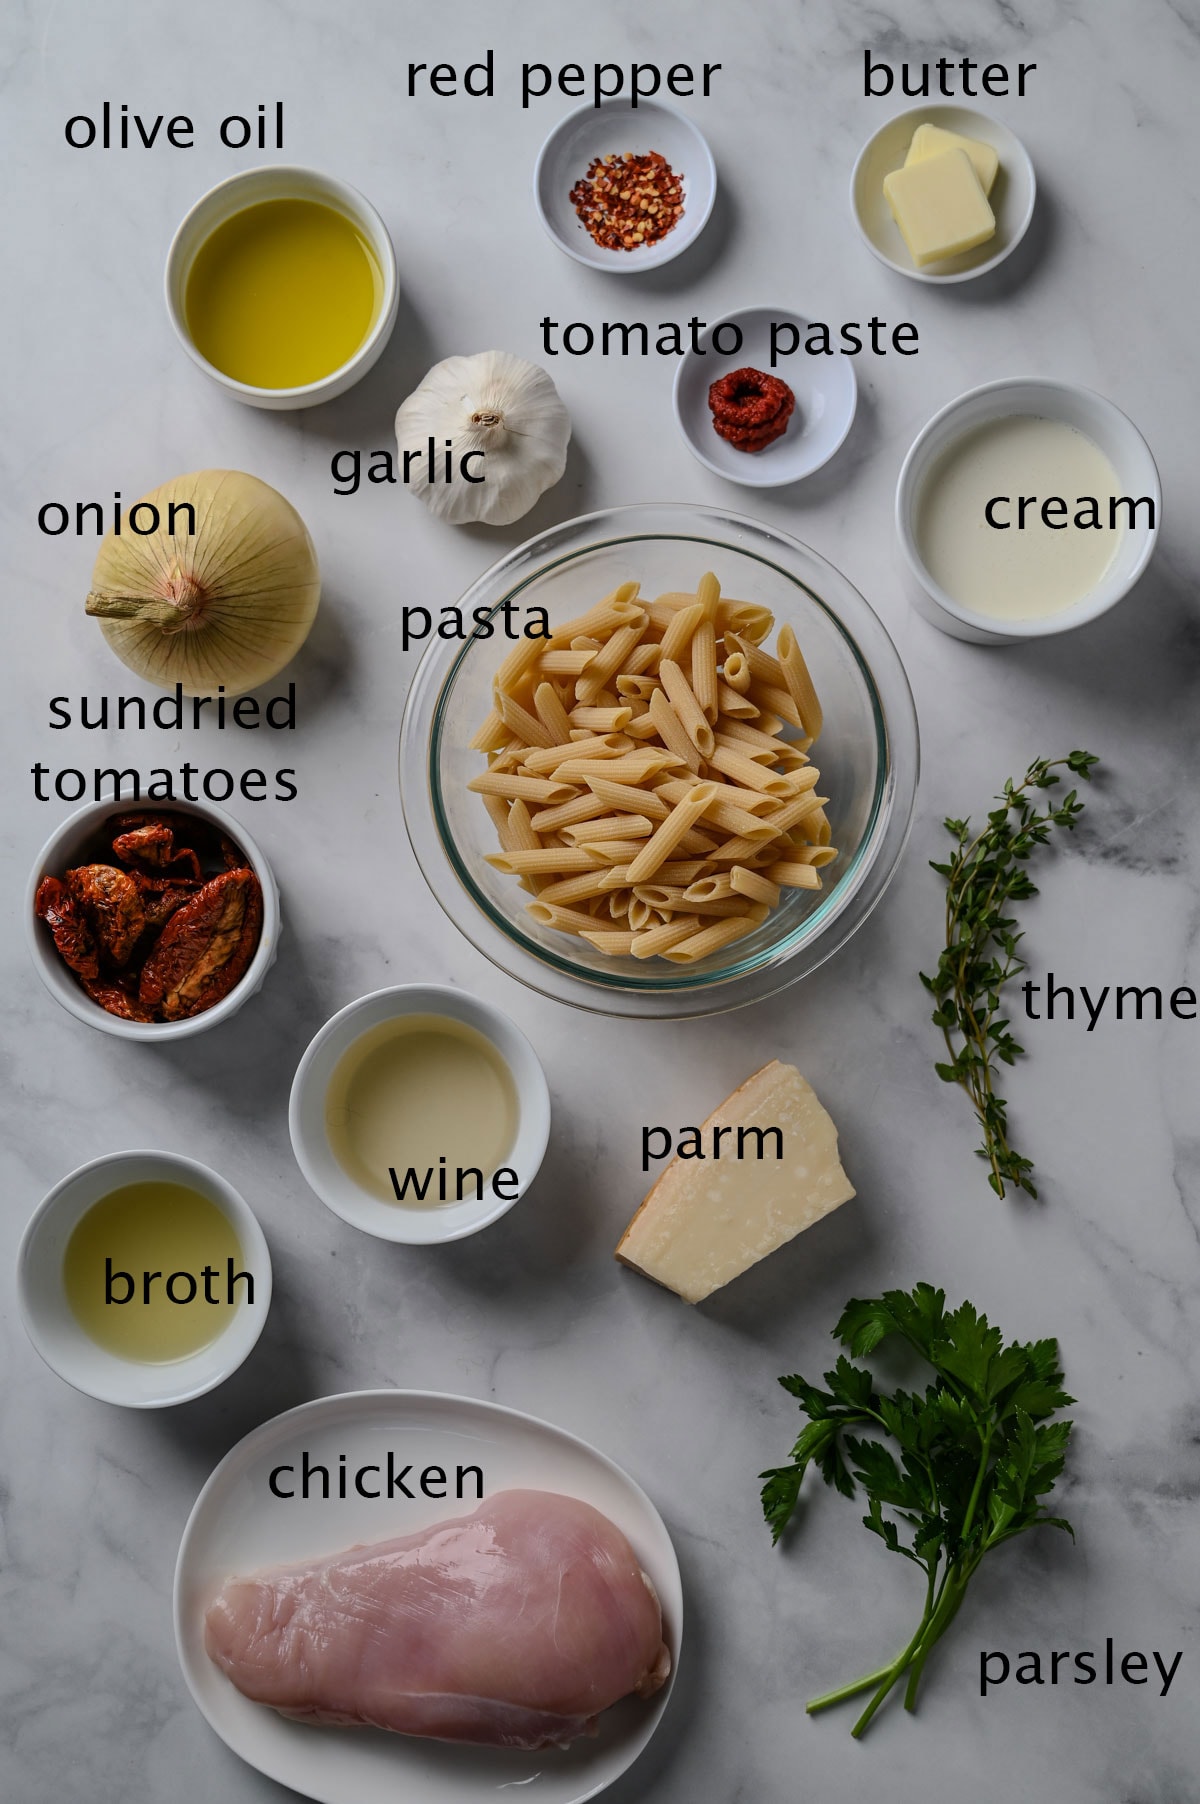 Labeled ingredients for pasta with chicken, cream, tomato paste, sundried tomatoes and herbs.